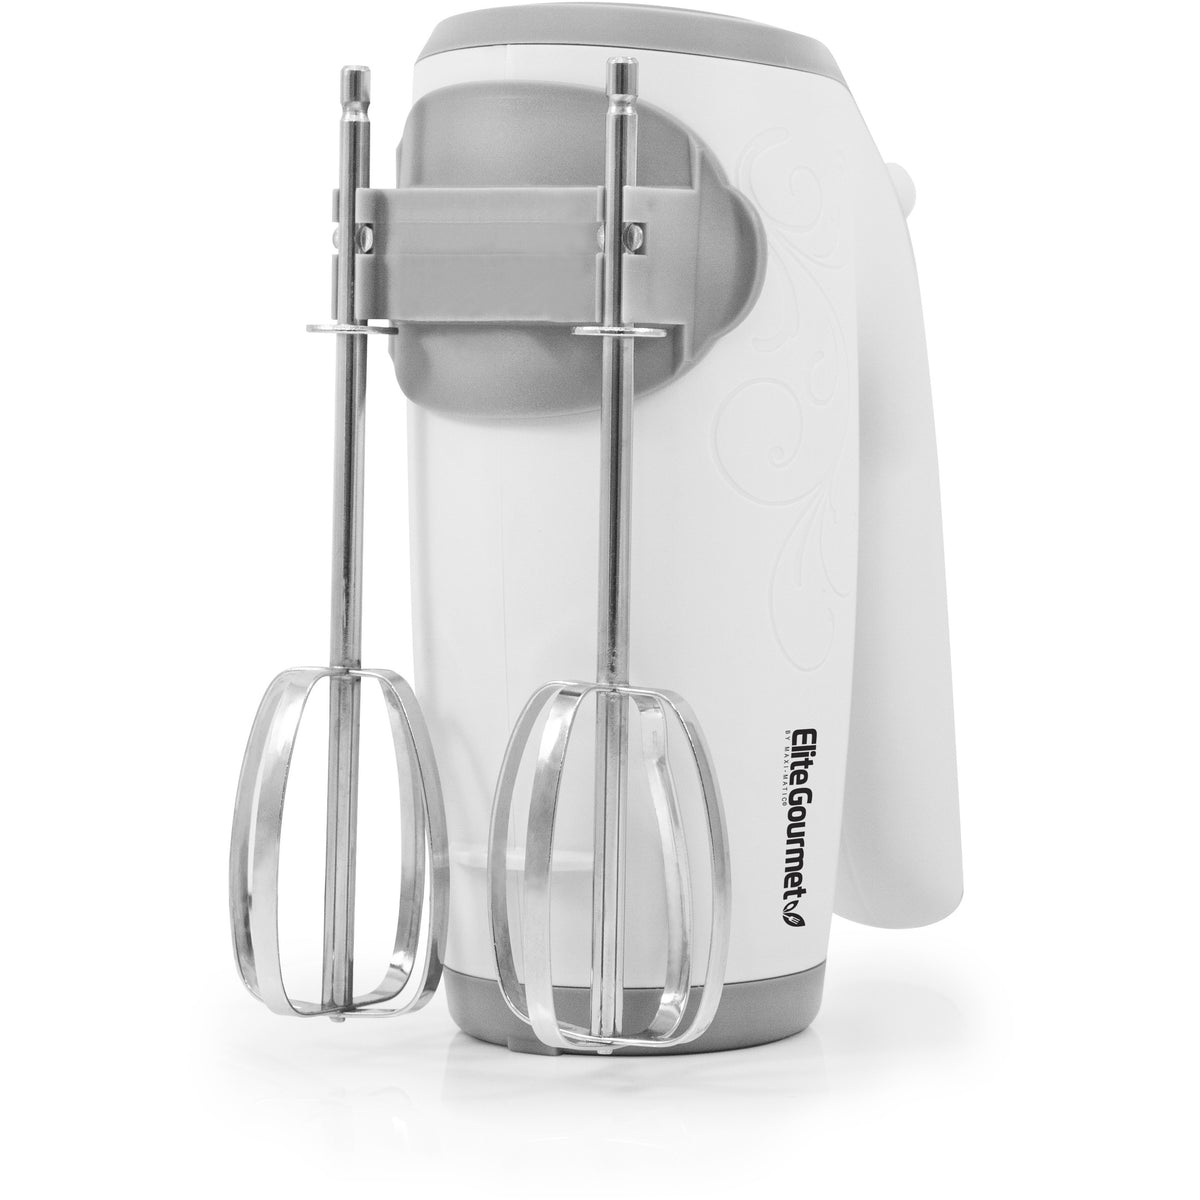 Vremi 3-Speed Compact Hand Mixer with Clever Built-In Beater